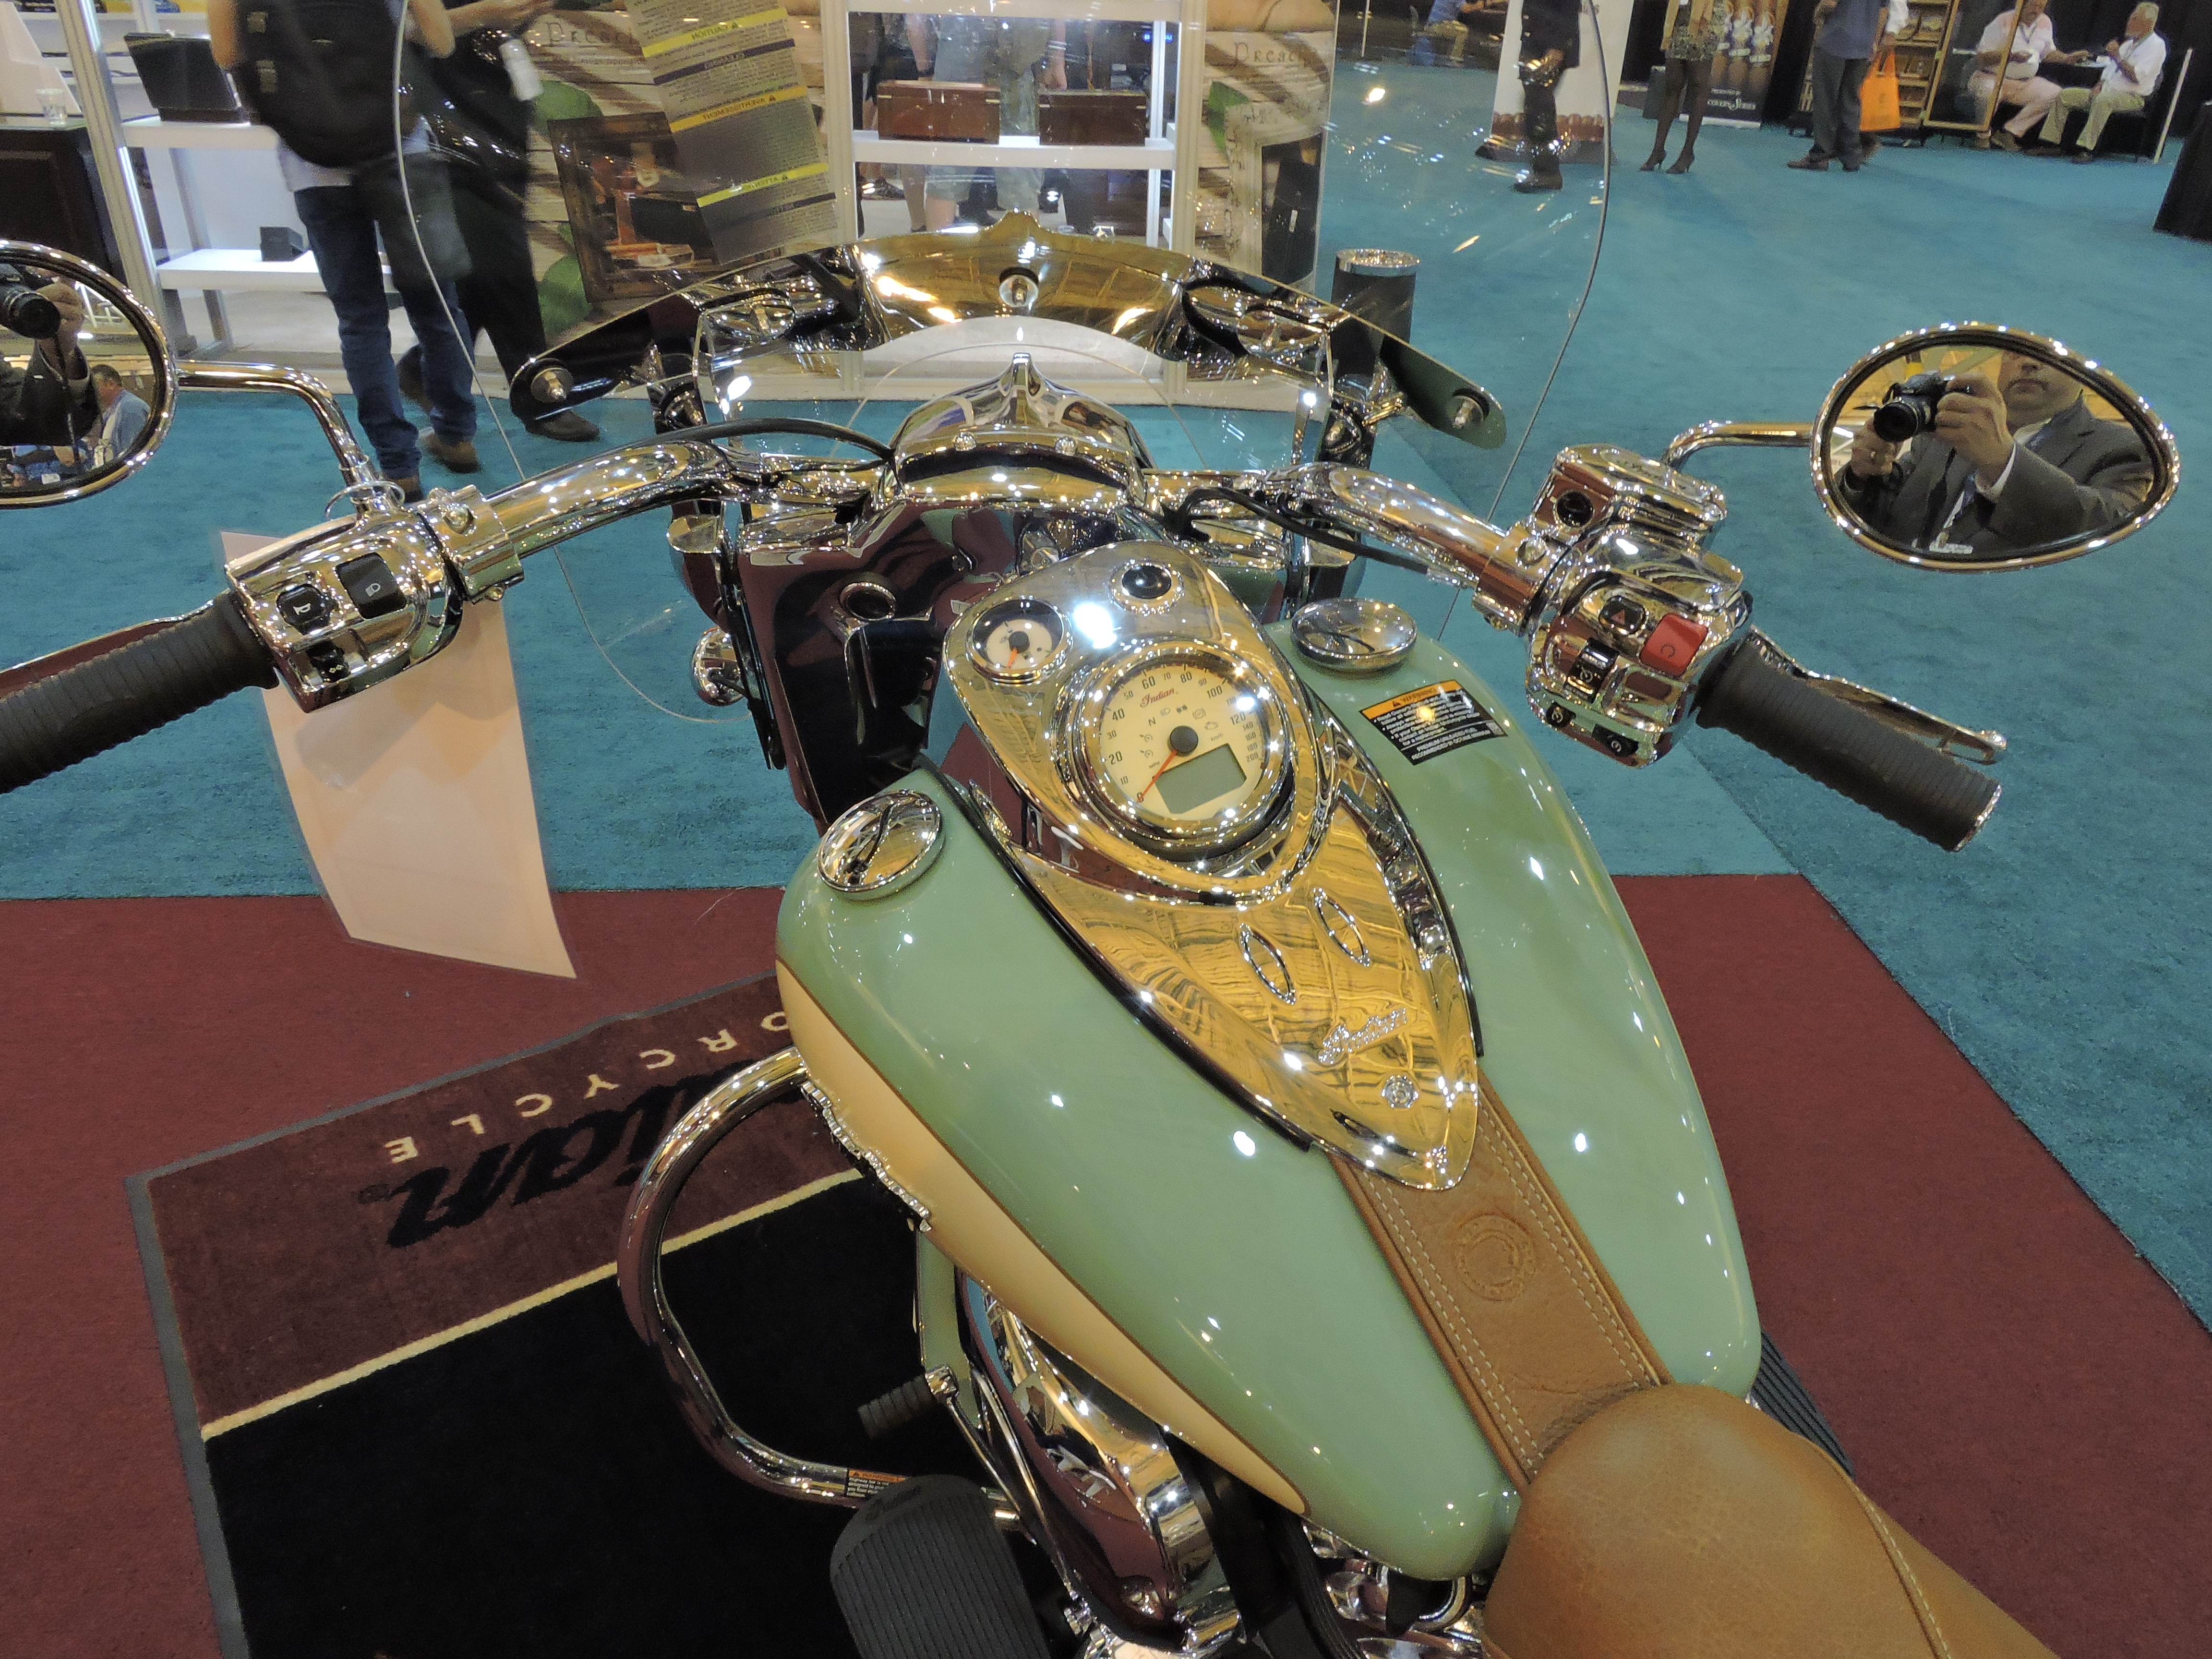 Indian_Motorcycle_2